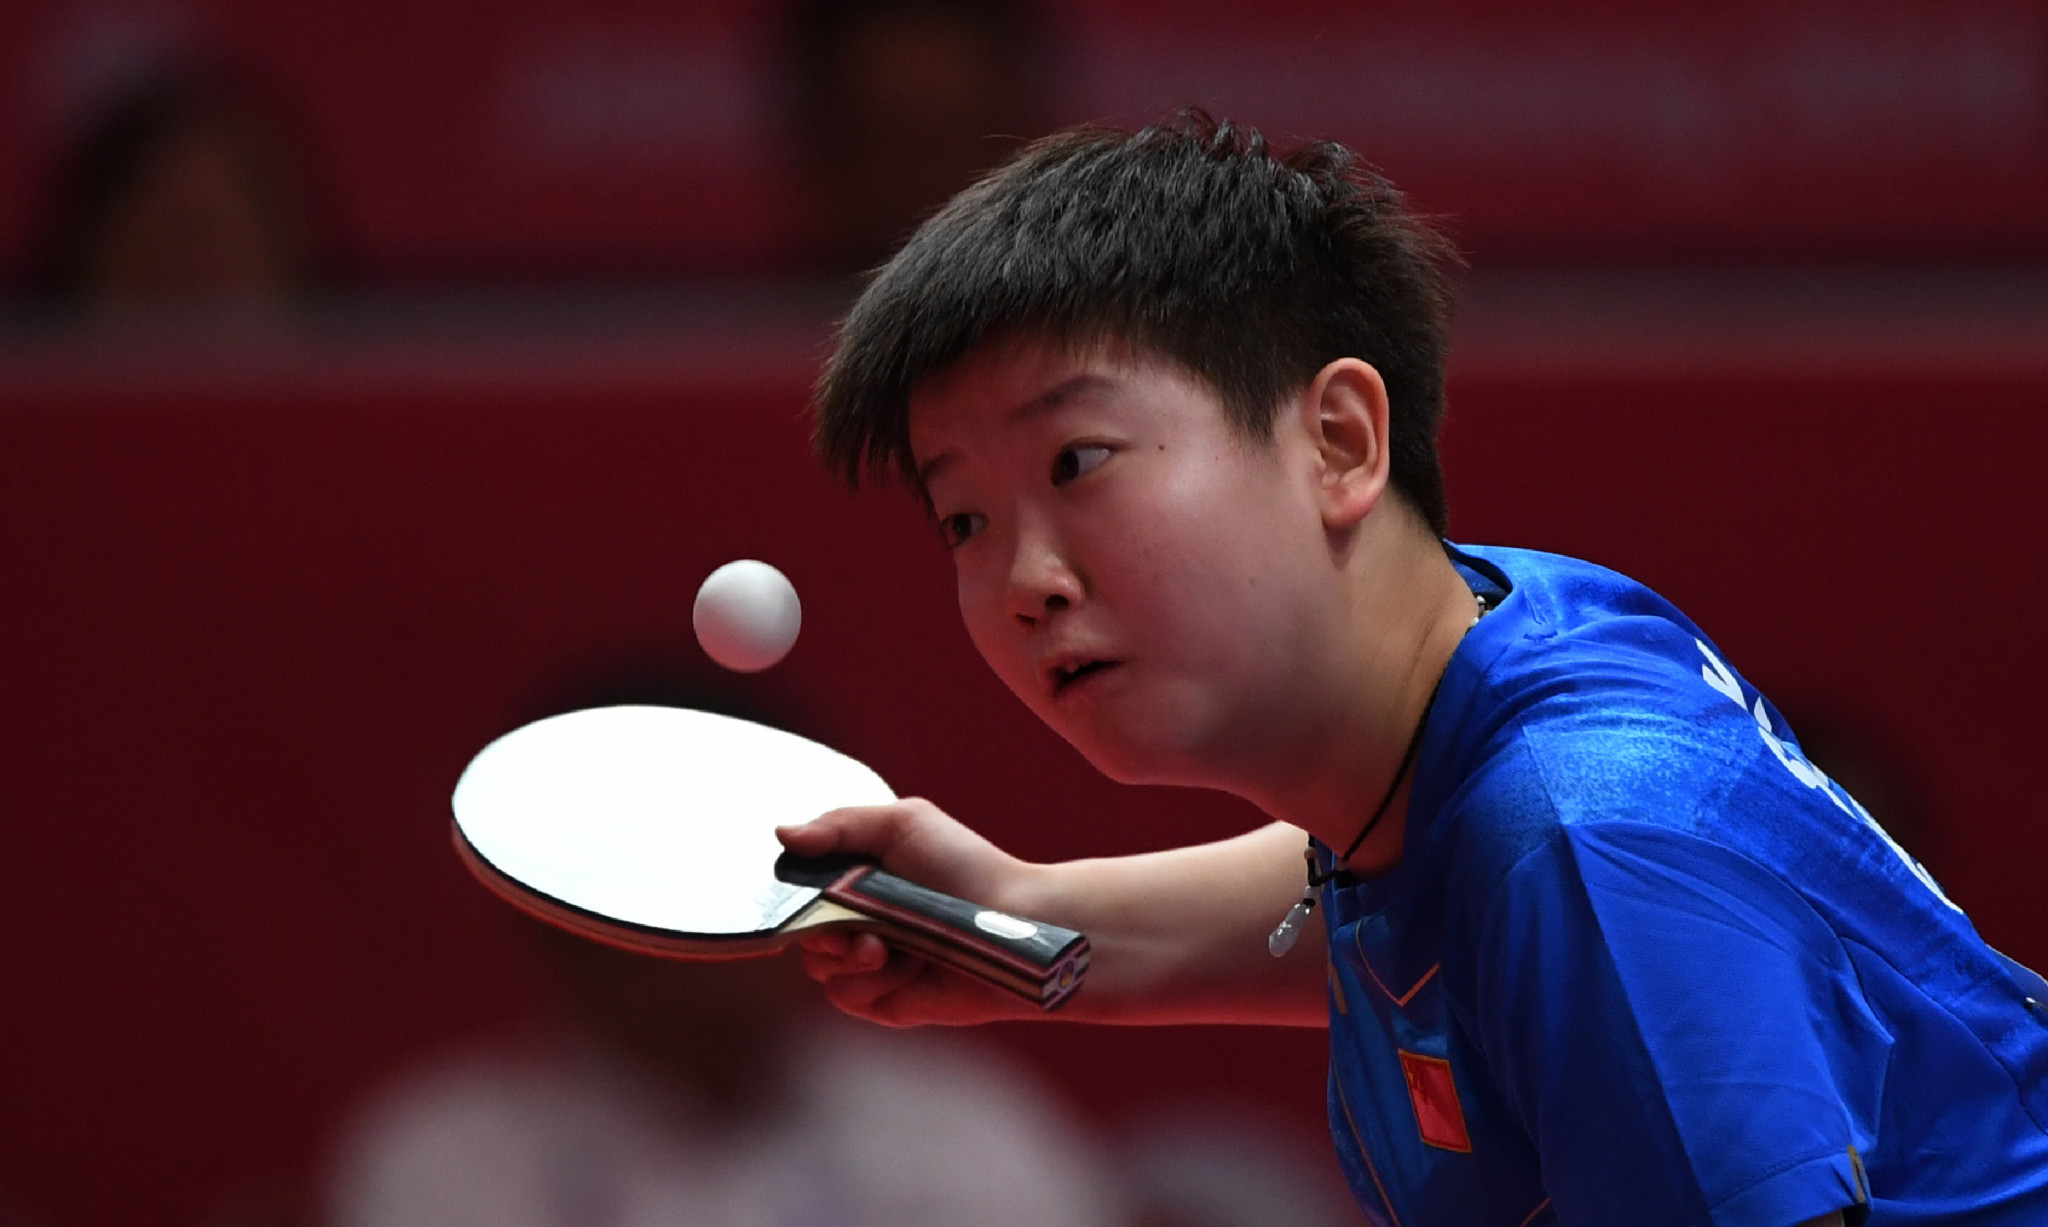 Sun Yingsha triumphed in the women's singles at the Chinese national trials to secure her place in the upcoming ITTF World Championships in South Africa ©Getty Images